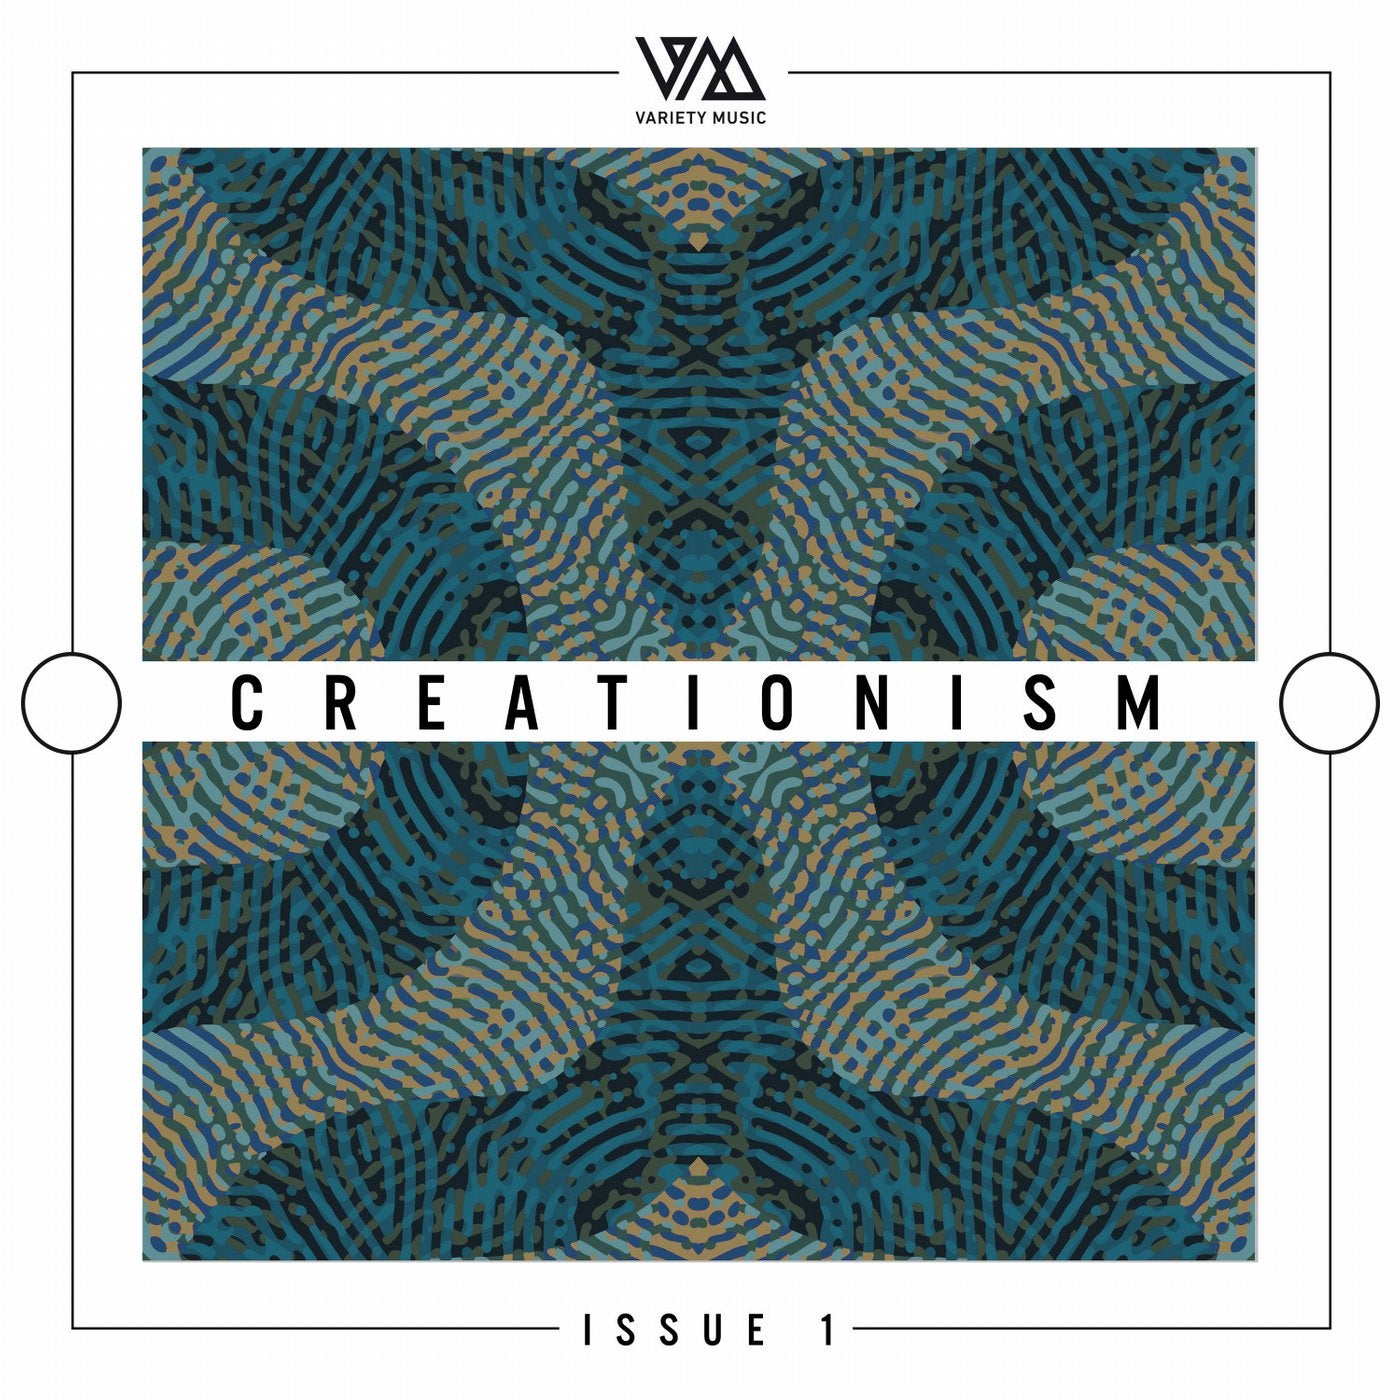 Variety Music pres. Creationism Issue 1